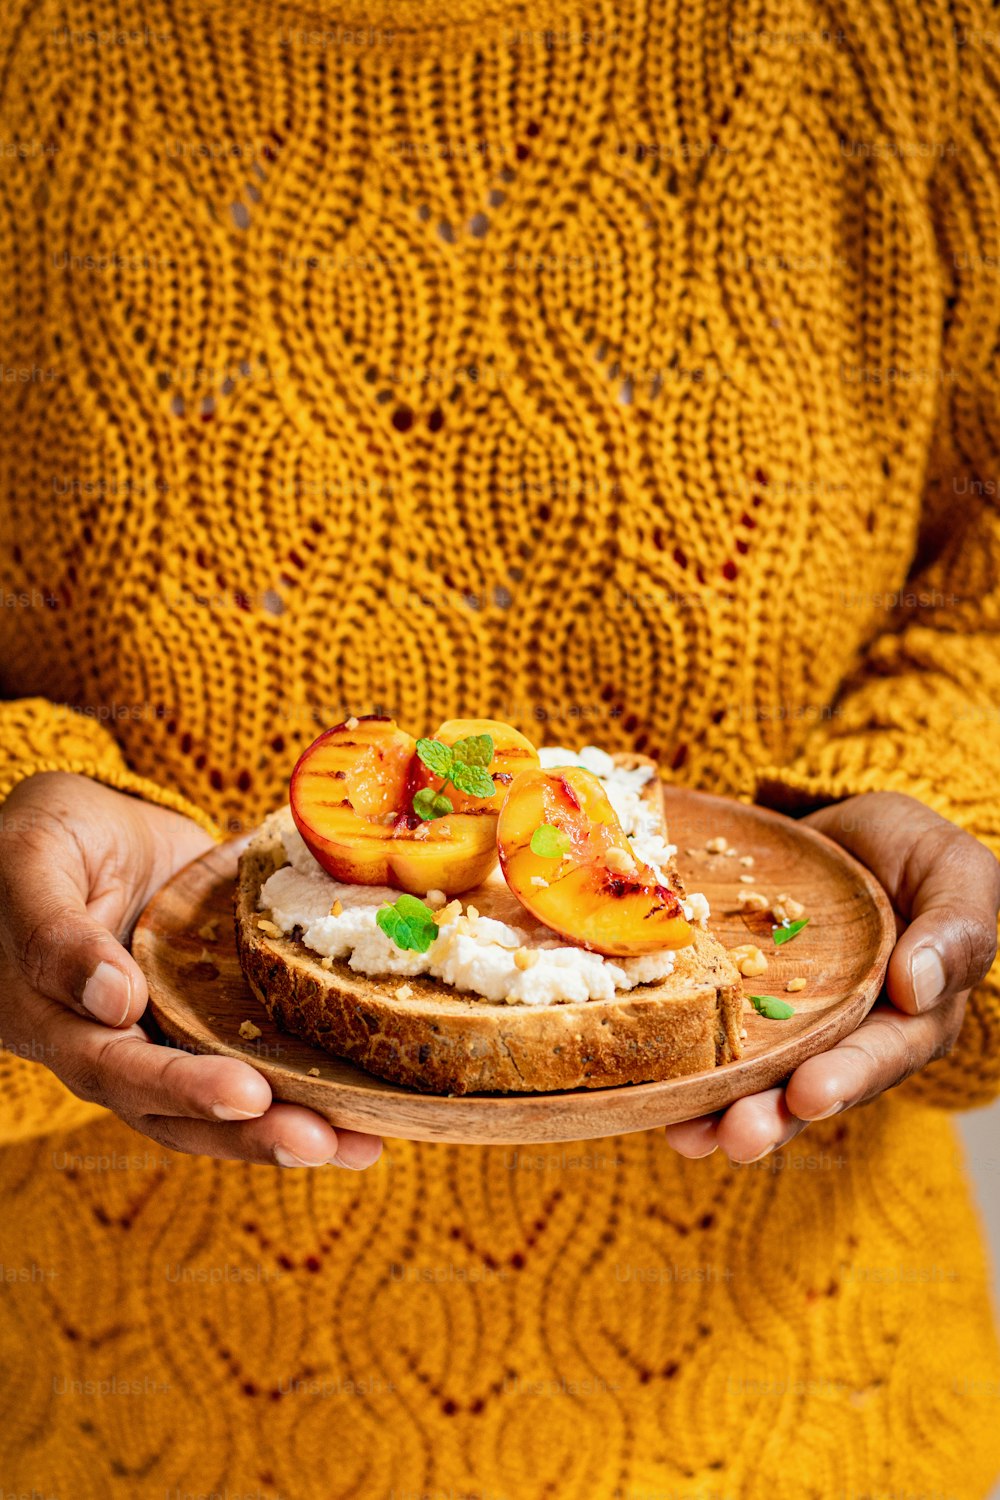 a woman in a yellow sweater holding a plate of food